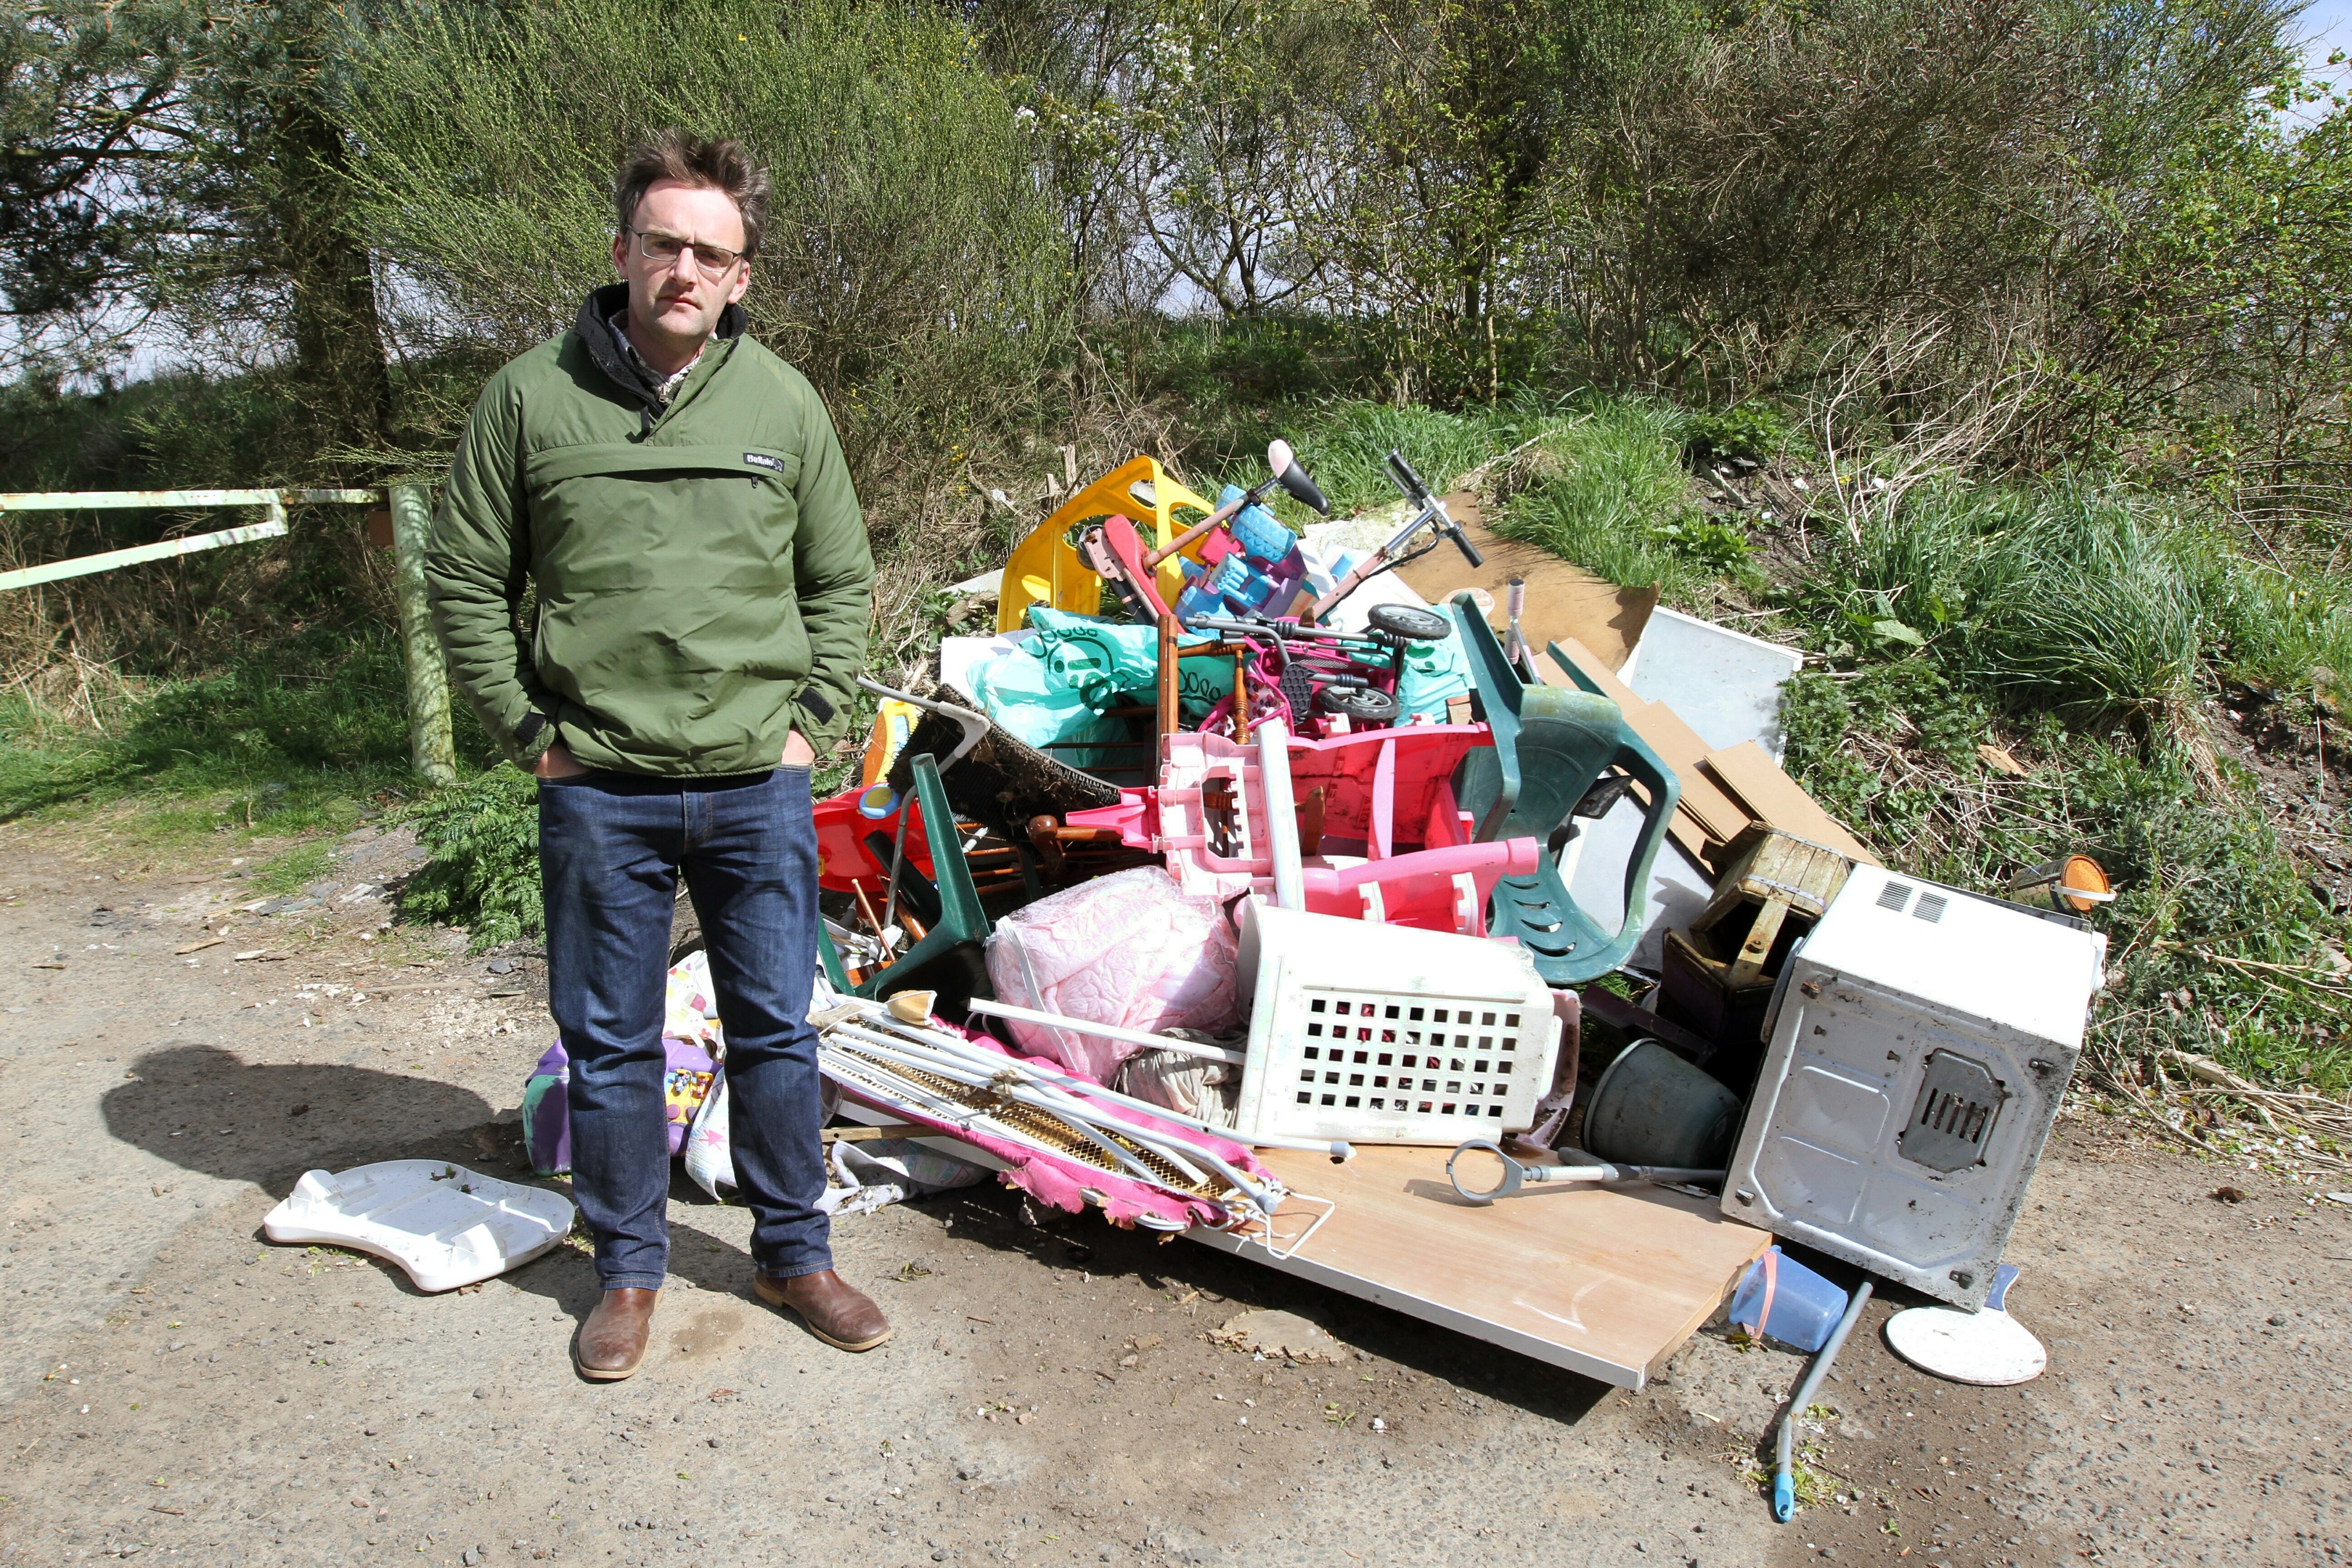 Tom Pate beside the rubbish dumped on Emmock Road.